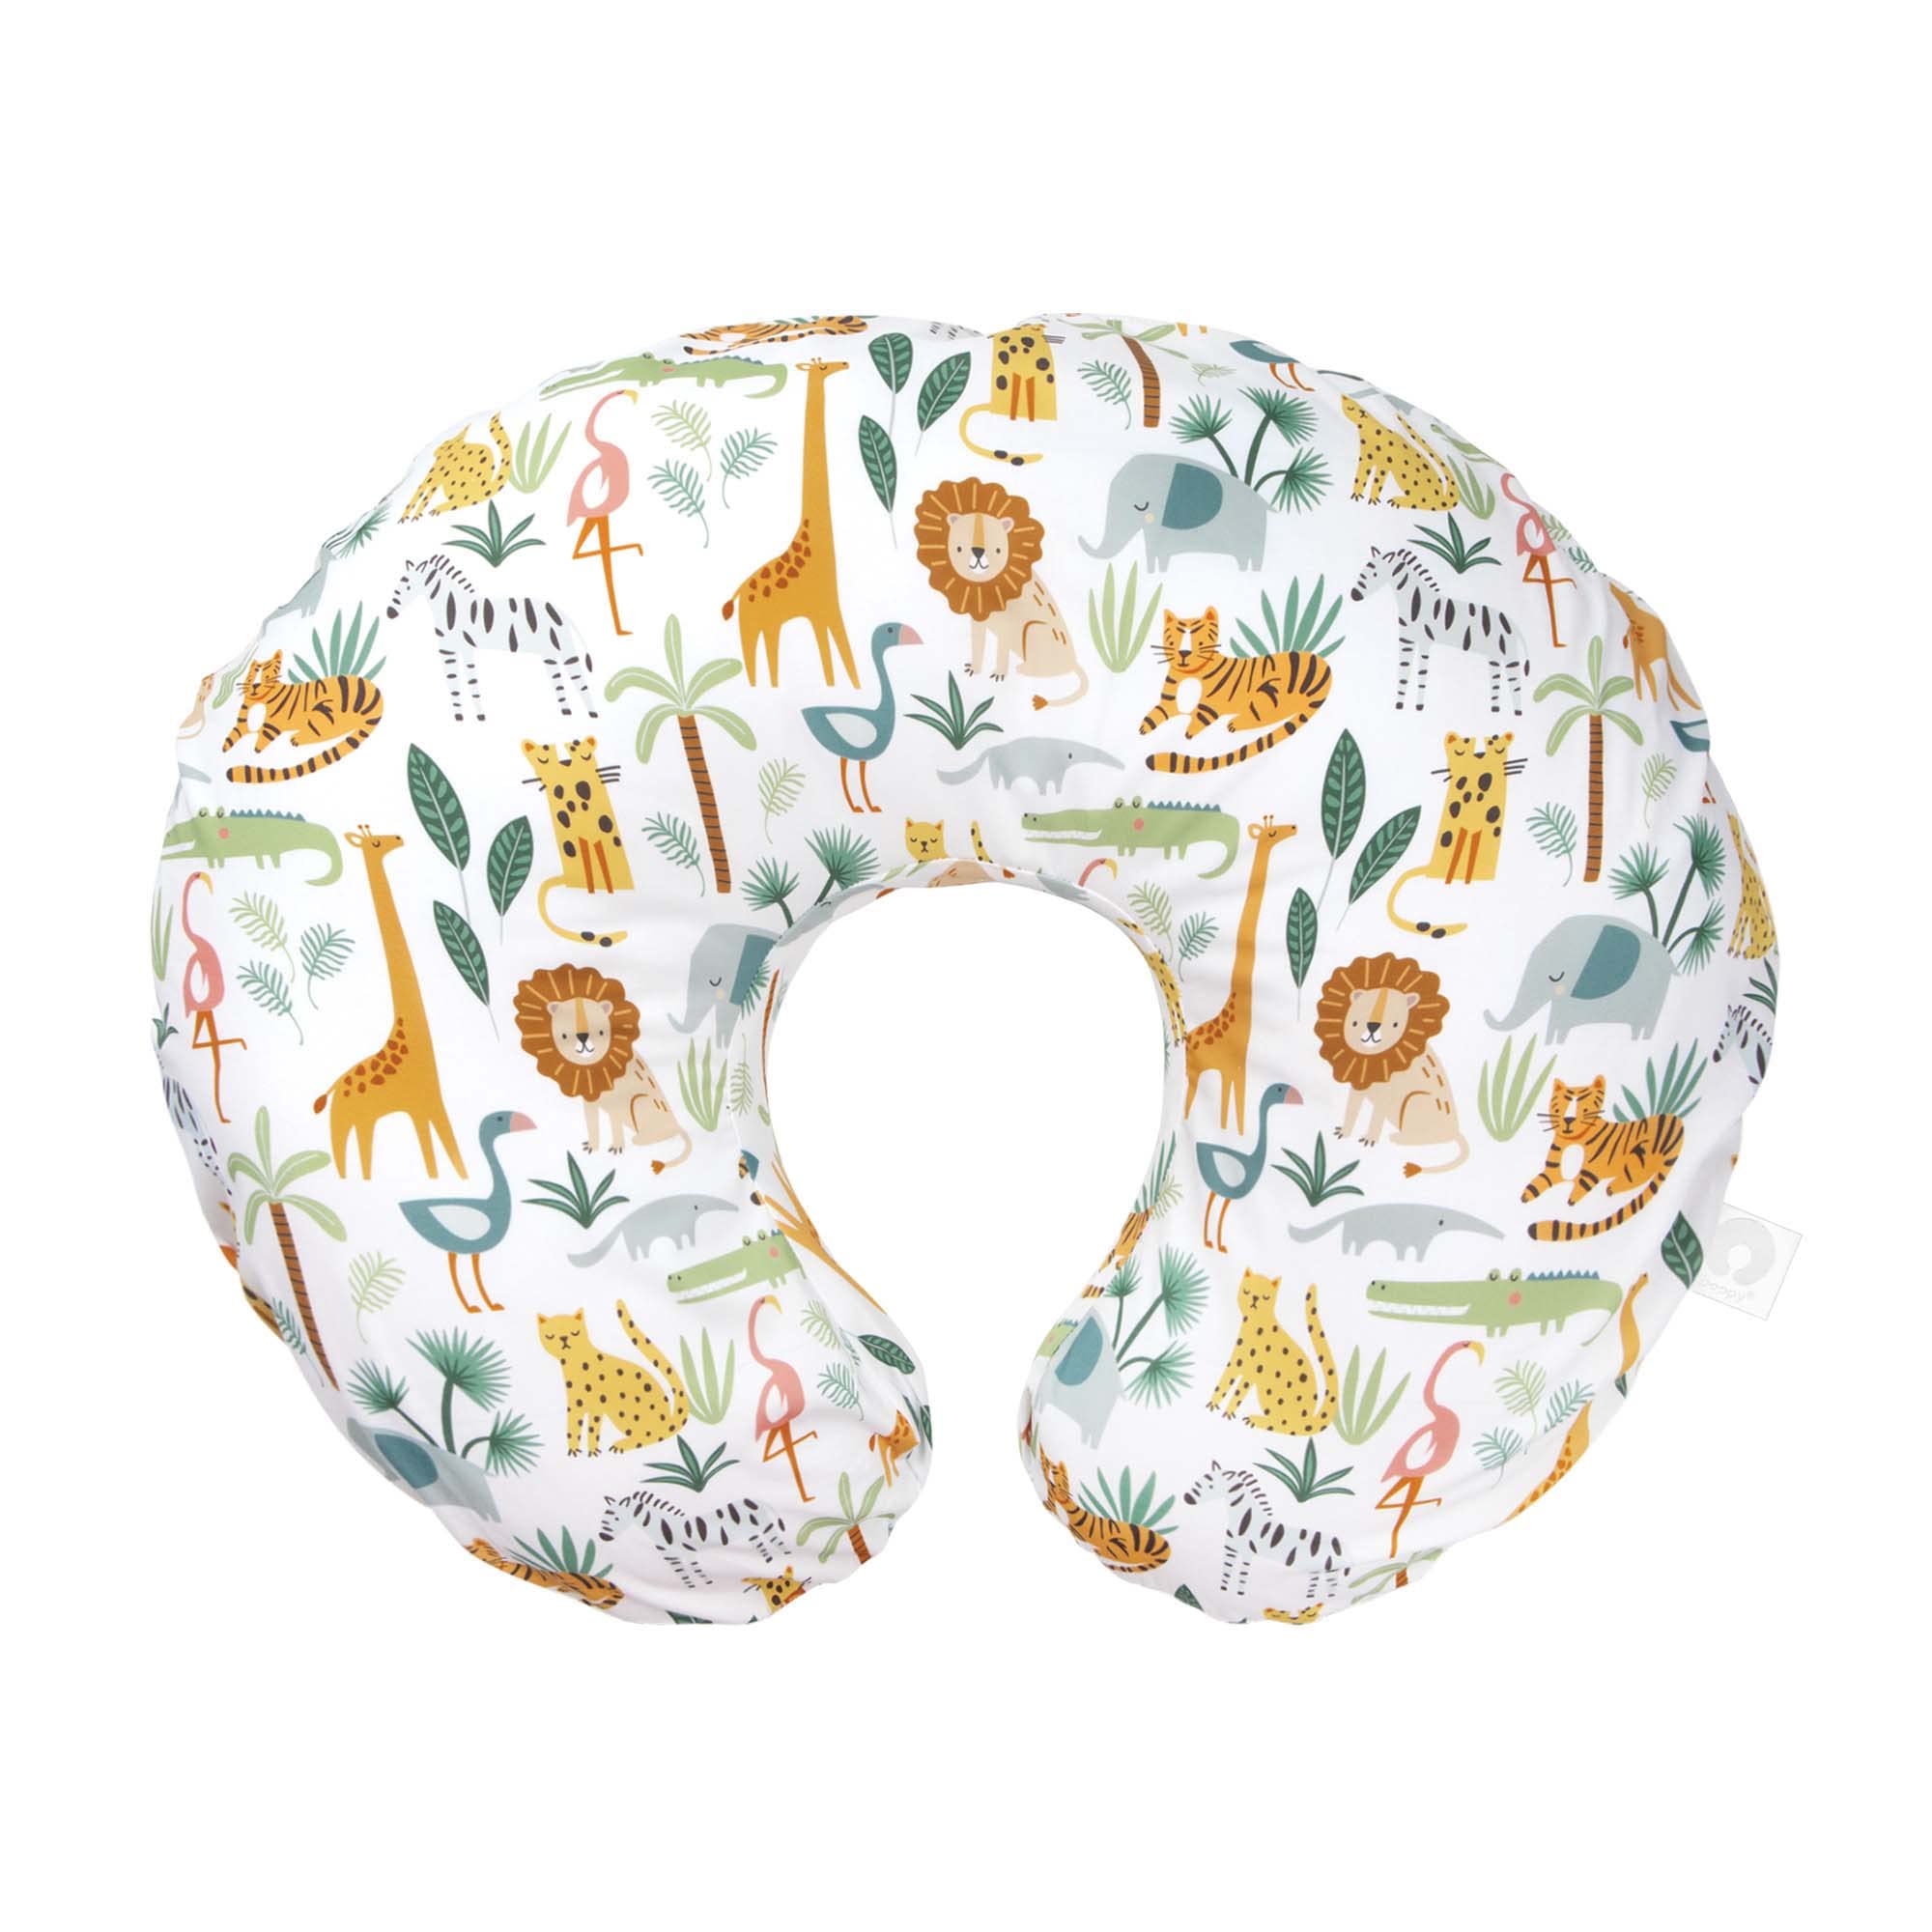 Boppy Nursing Pillow Original Support, Colorful Wildlife, Ergonomic Nursing Essentials for Bottle and Breastfeeding, Firm Fiber Fill, with Removable Nursing Pillow Cover, Machine Washable